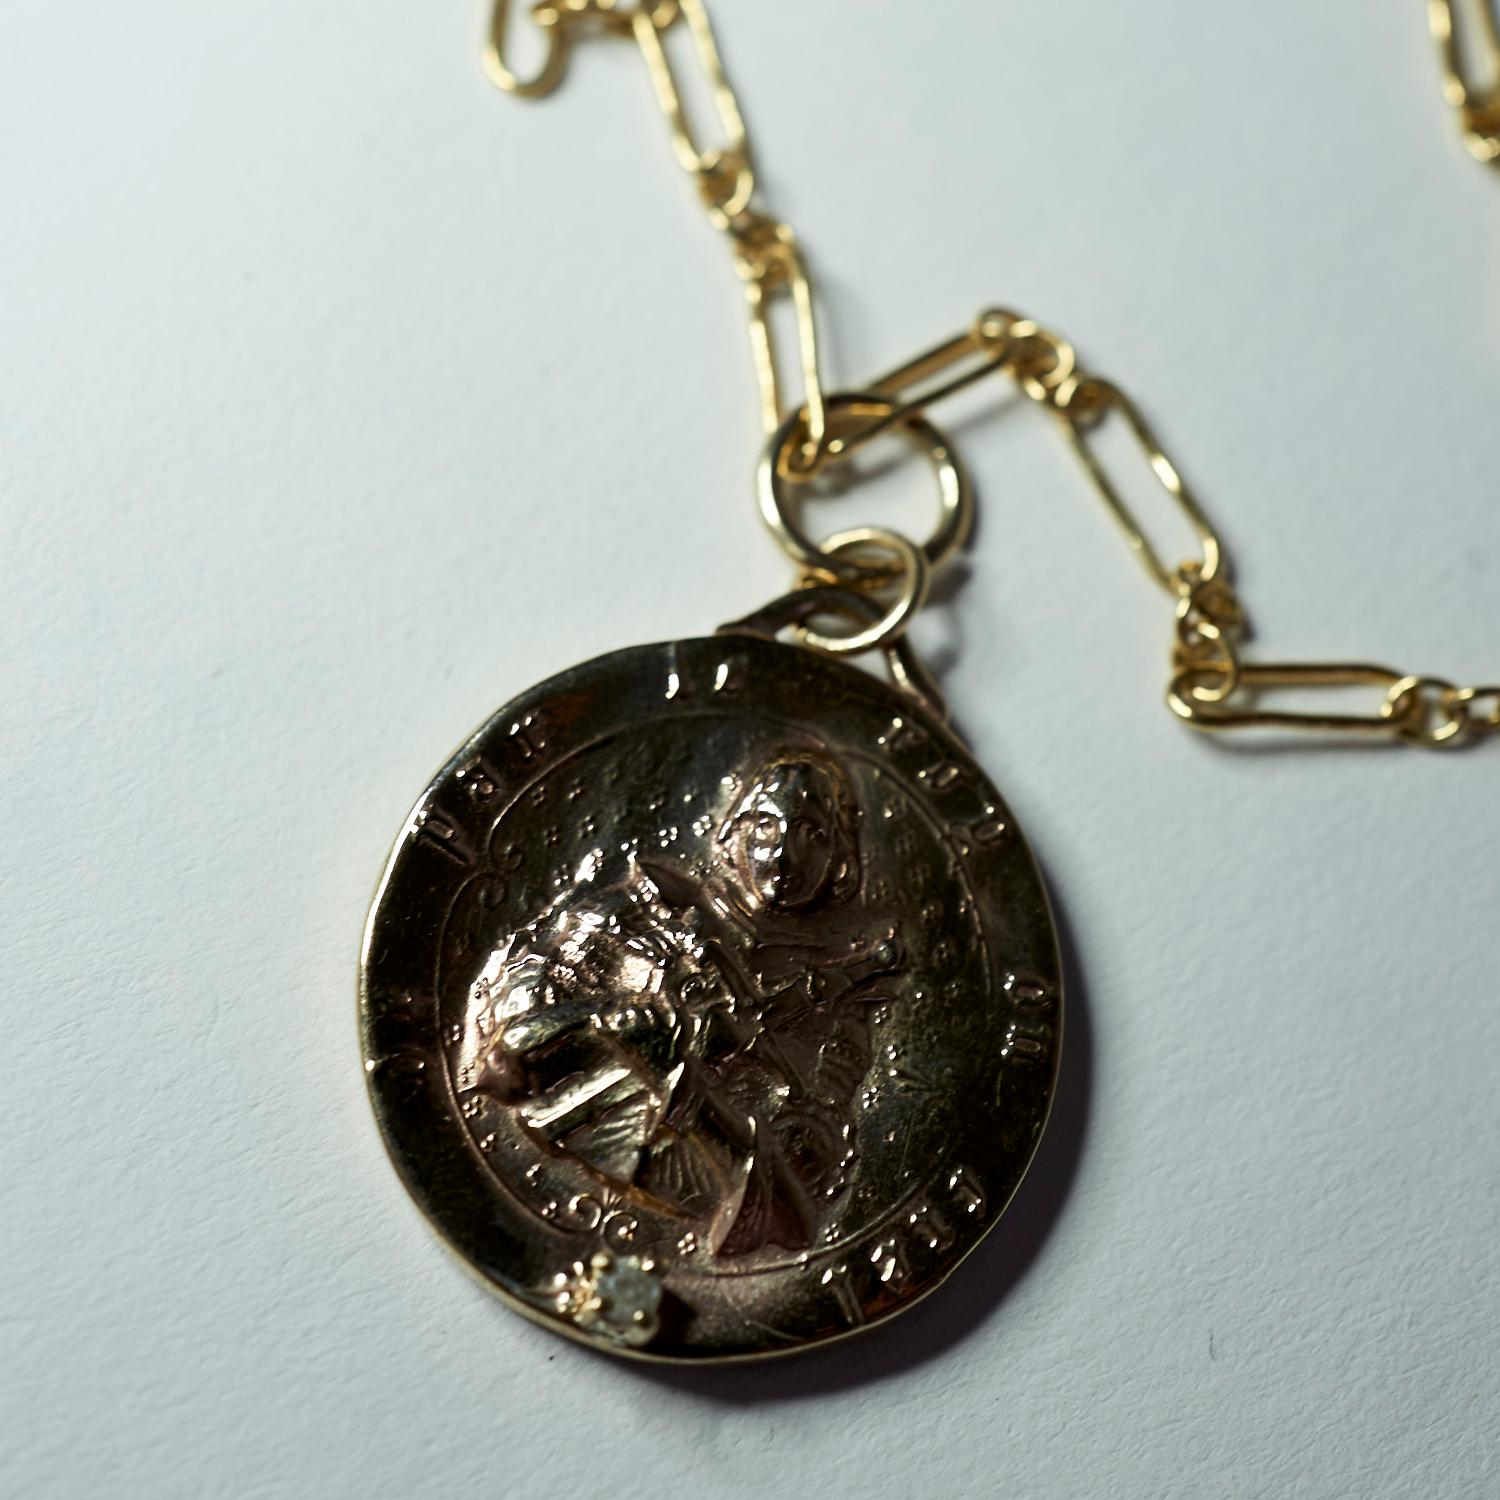 Raw Diamond French Saint Joan of Arc Medal Coin Bronze Pendant Gold Filled Chain Necklace J Dauphin

Exclusive piece with Joan of Arc Medal Round Coin pendant in Bronze with an Emerald and a gold filled Chain. Necklace is 24